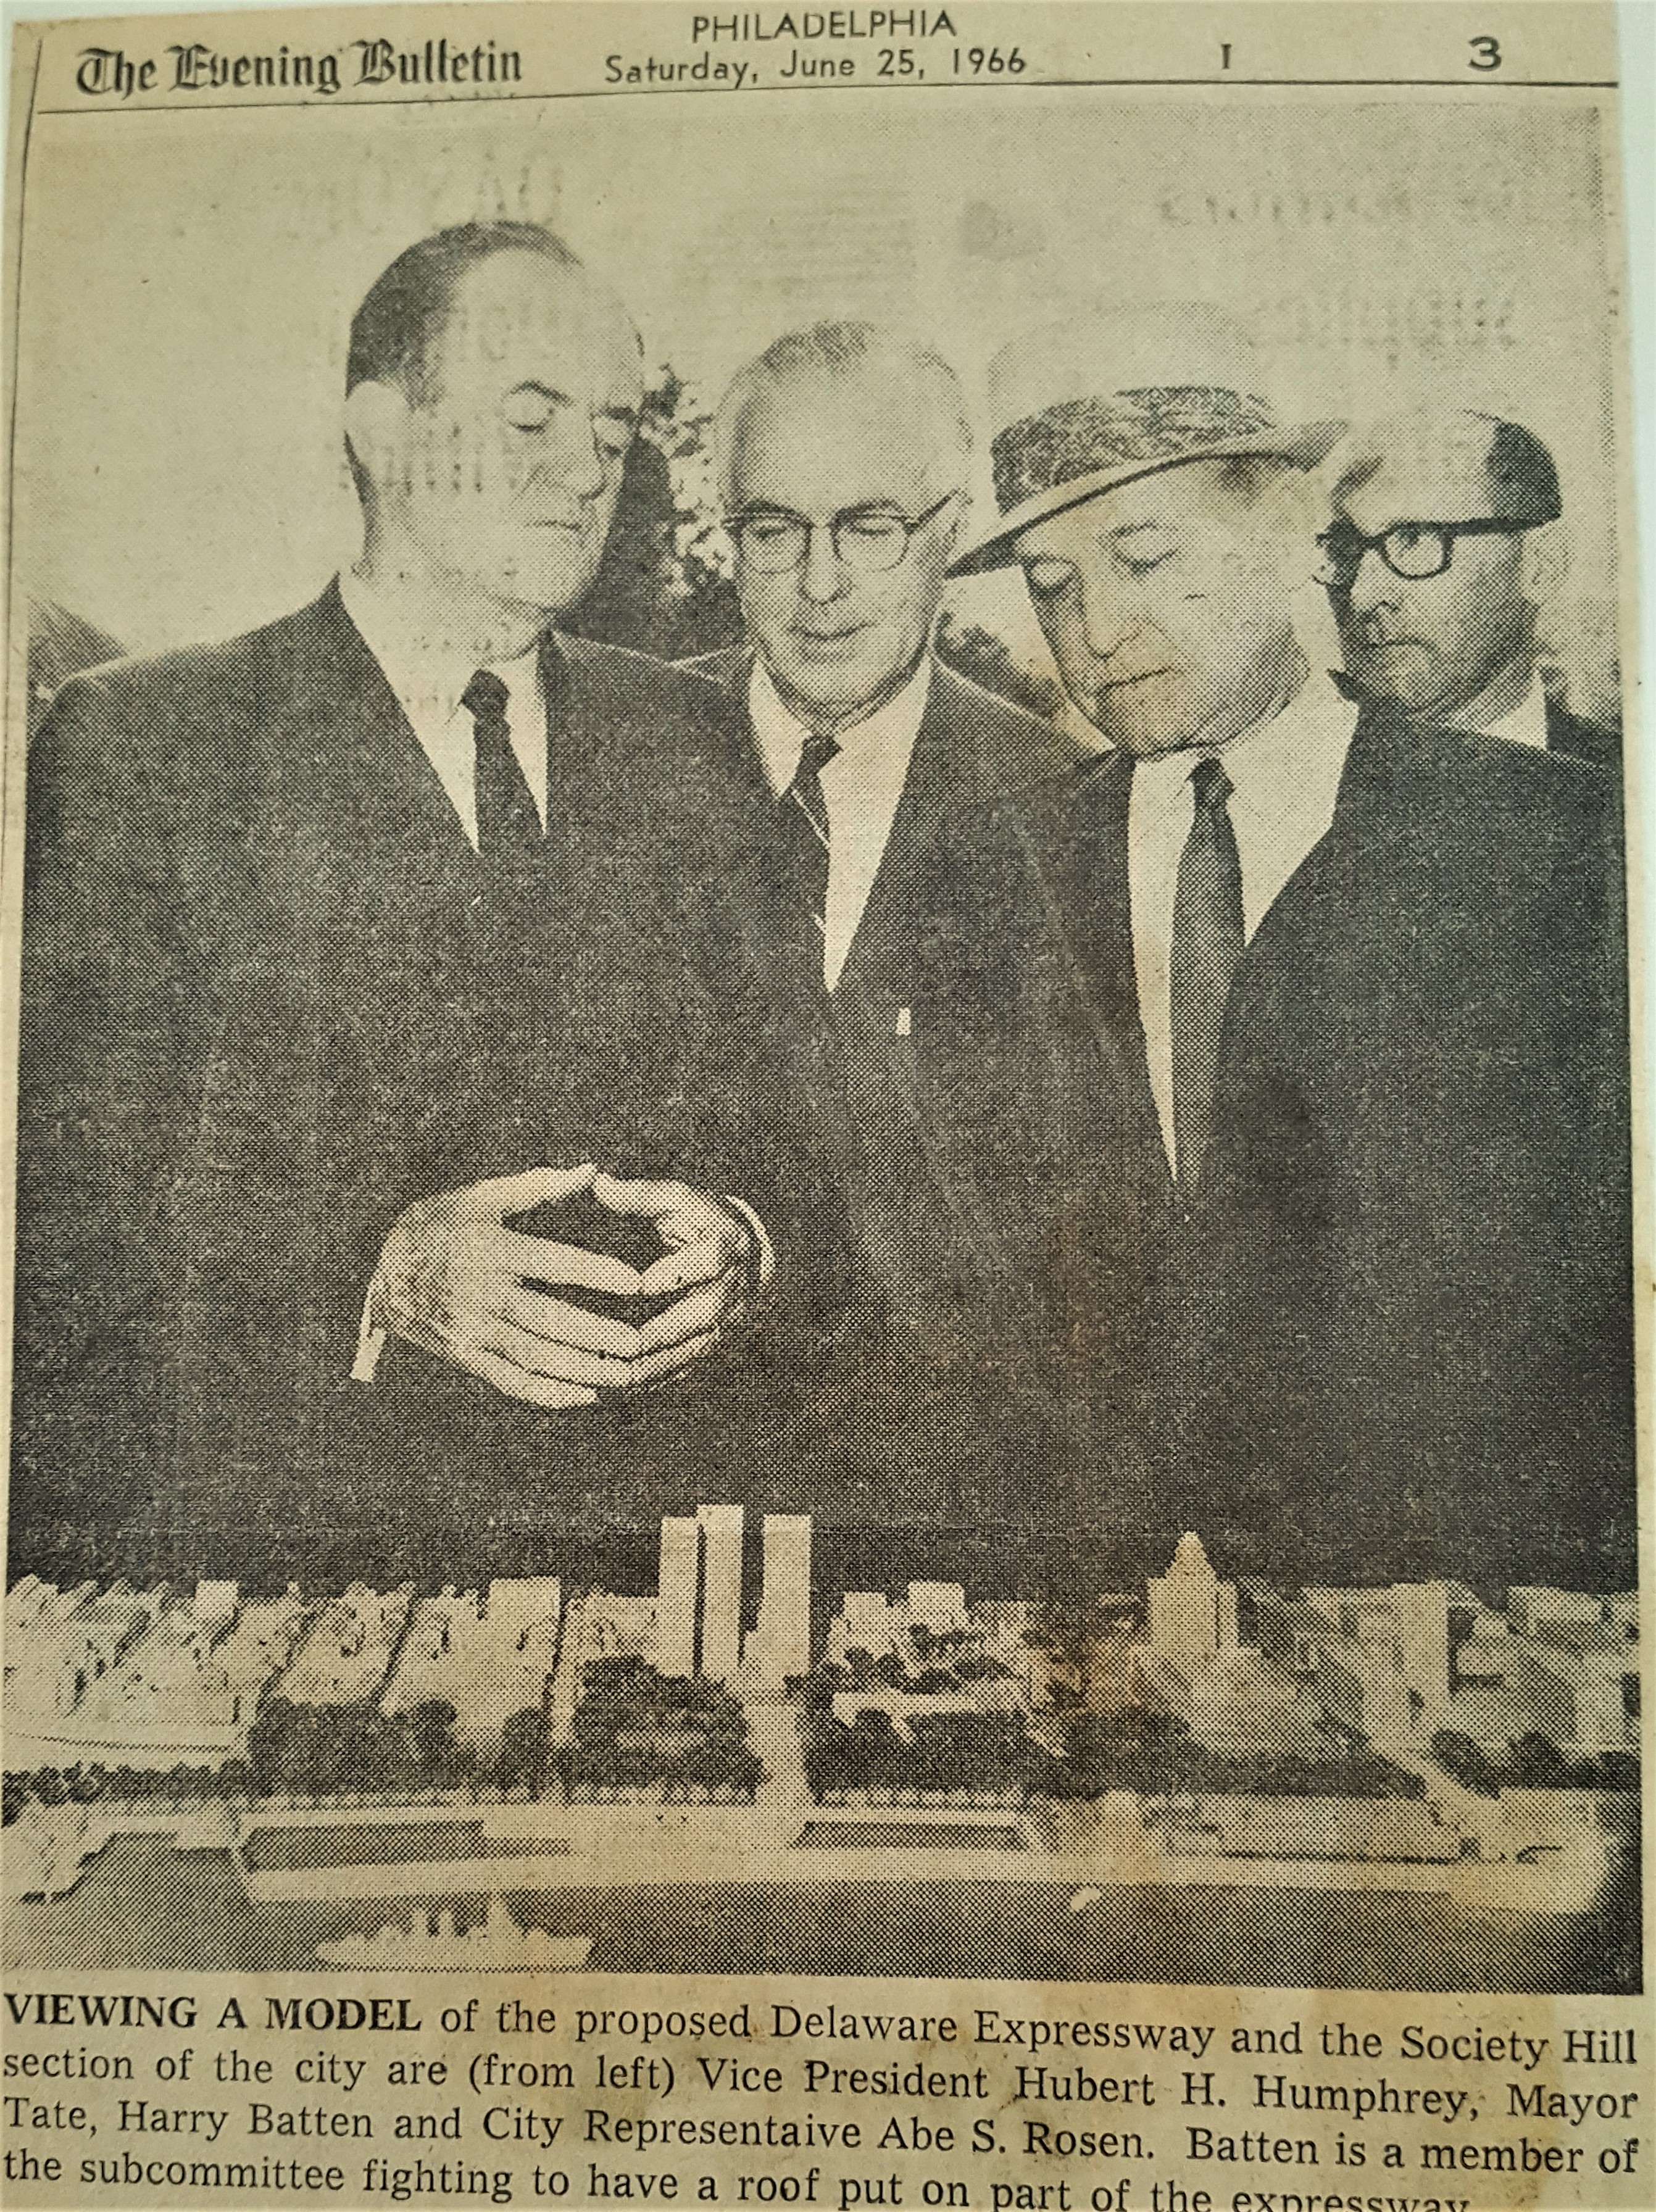 Officials show the model to Vice President Hubert Humphrey